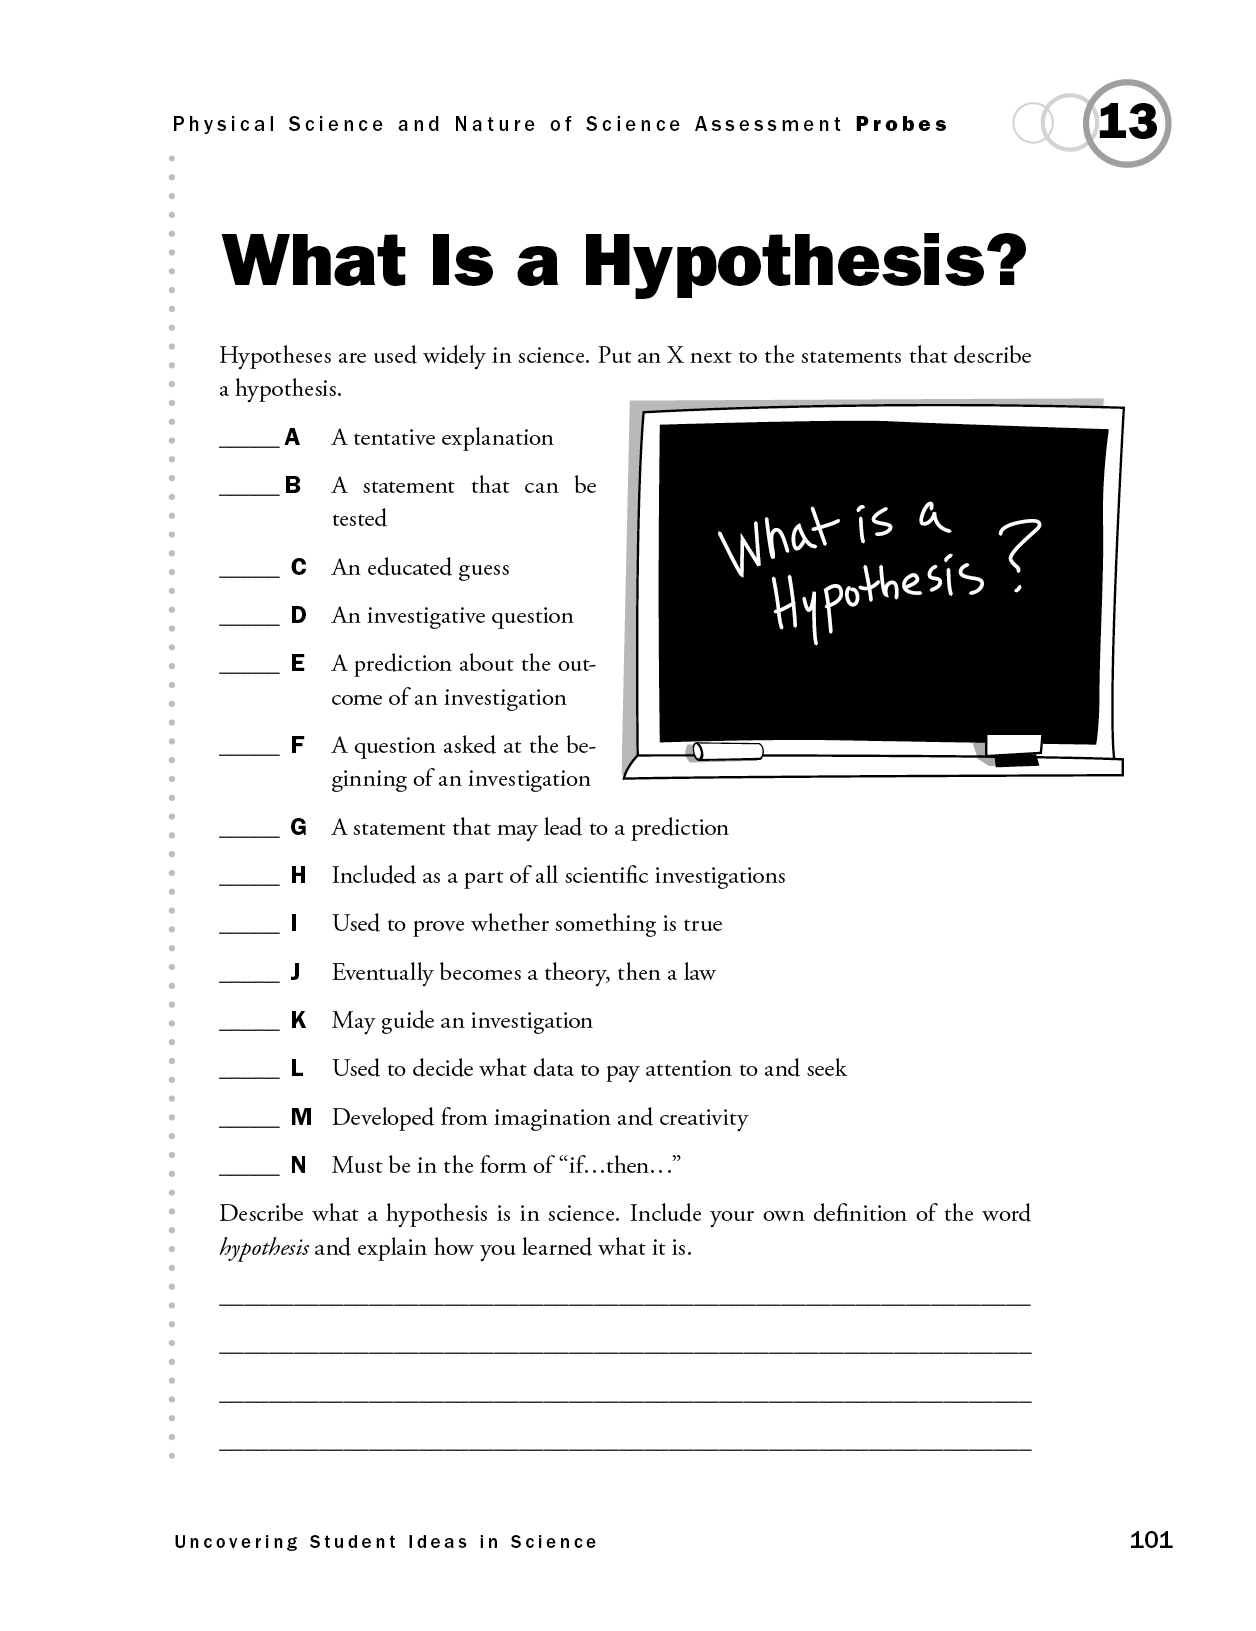 What Is a Hypothesis?